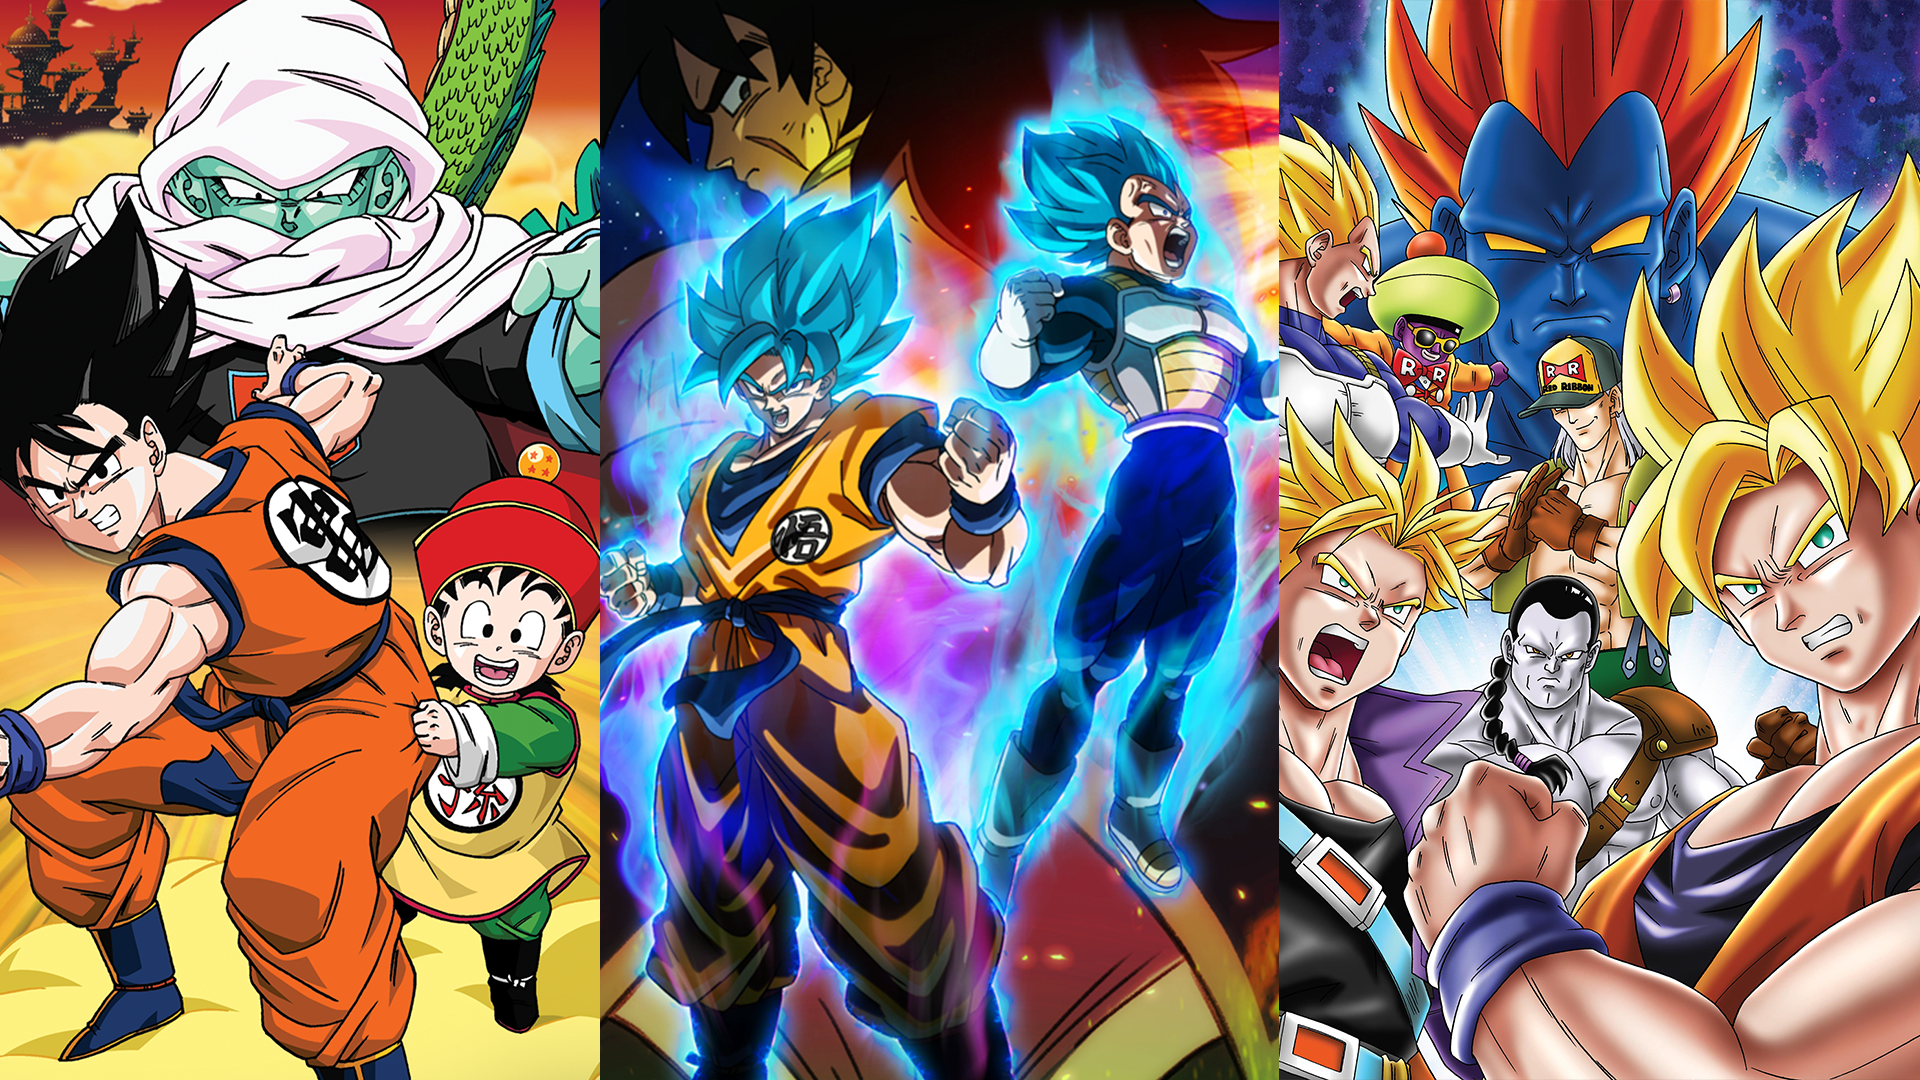 Crunchyroll To Add 15 Dragon Ball Movies To Its Catalogue